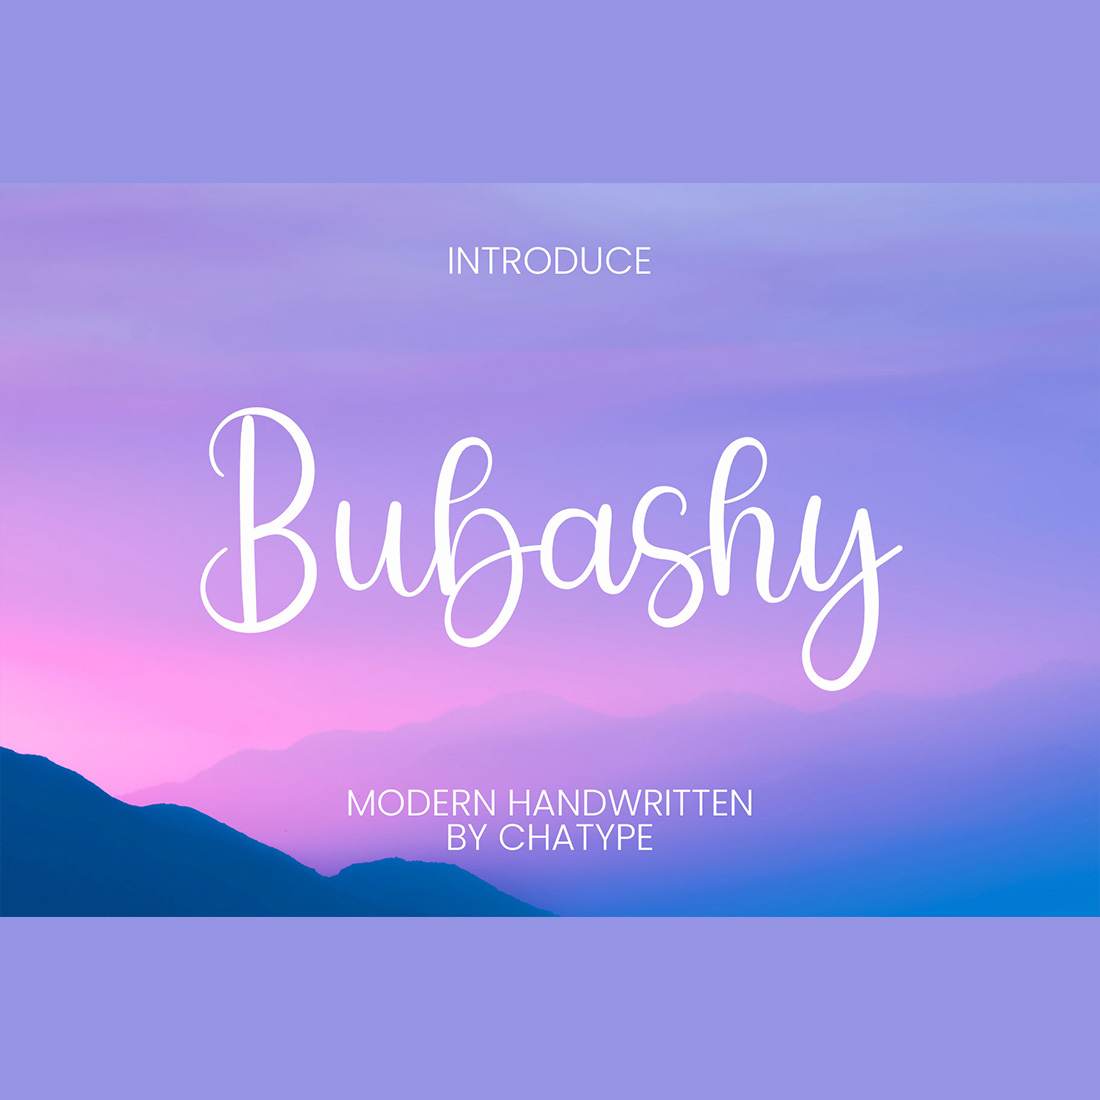 Colorful Bubashy font cover